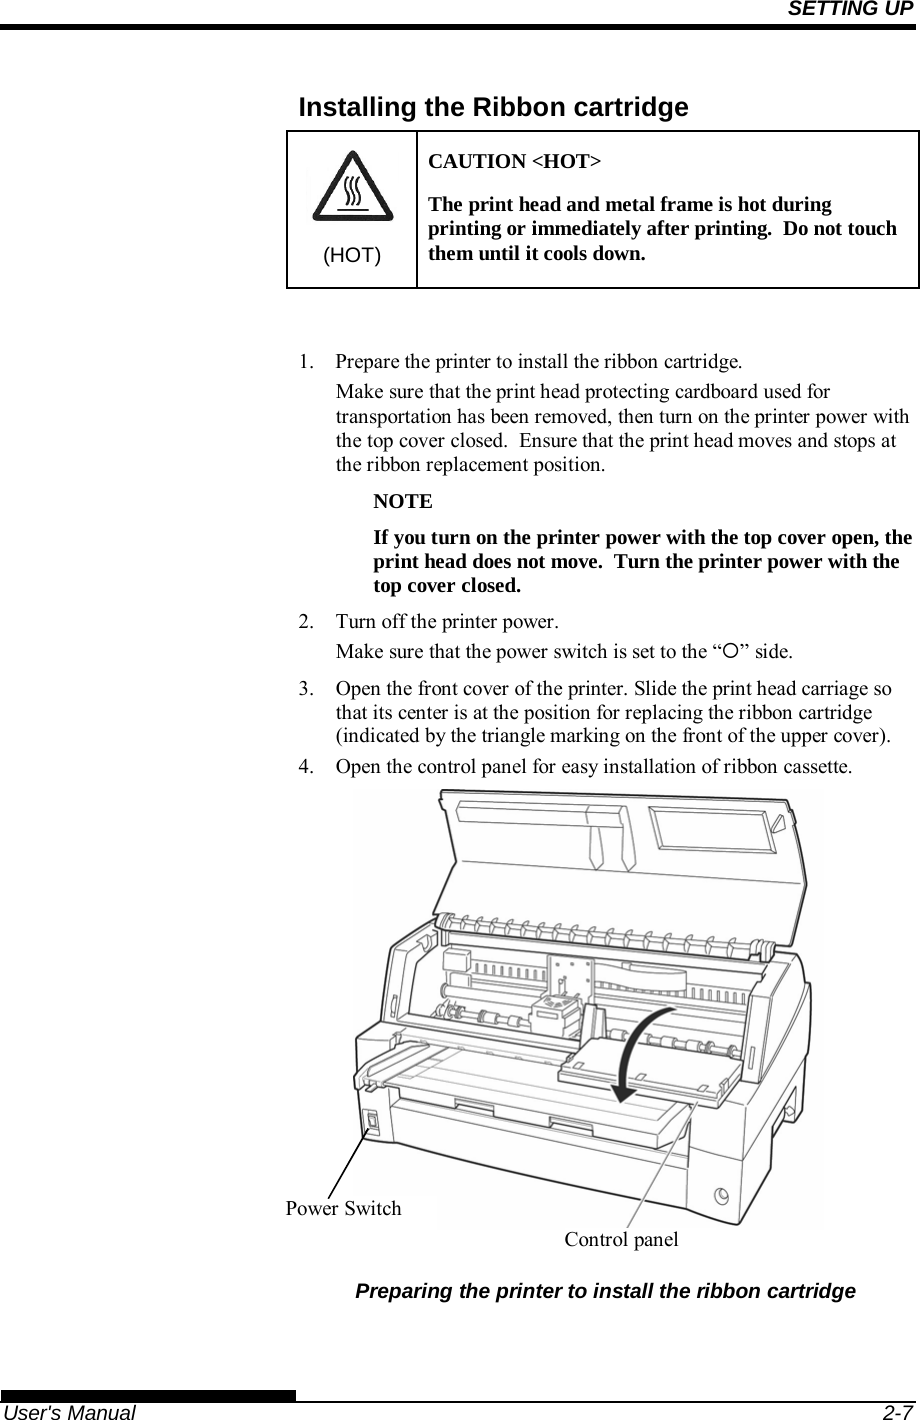 SETTING UP   User&apos;s Manual  2-7 Installing the Ribbon cartridge (HOT) CAUTION &lt;HOT&gt; The print head and metal frame is hot during printing or immediately after printing.  Do not touch them until it cools down.  1.  Prepare the printer to install the ribbon cartridge. Make sure that the print head protecting cardboard used for transportation has been removed, then turn on the printer power with the top cover closed.  Ensure that the print head moves and stops at the ribbon replacement position.  NOTE If you turn on the printer power with the top cover open, the print head does not move.  Turn the printer power with the top cover closed. 2.  Turn off the printer power. Make sure that the power switch is set to the “” side. 3. Open the front cover of the printer. Slide the print head carriage so that its center is at the position for replacing the ribbon cartridge (indicated by the triangle marking on the front of the upper cover). 4. Open the control panel for easy installation of ribbon cassette.           Preparing the printer to install the ribbon cartridge  Power Switch Control panel 